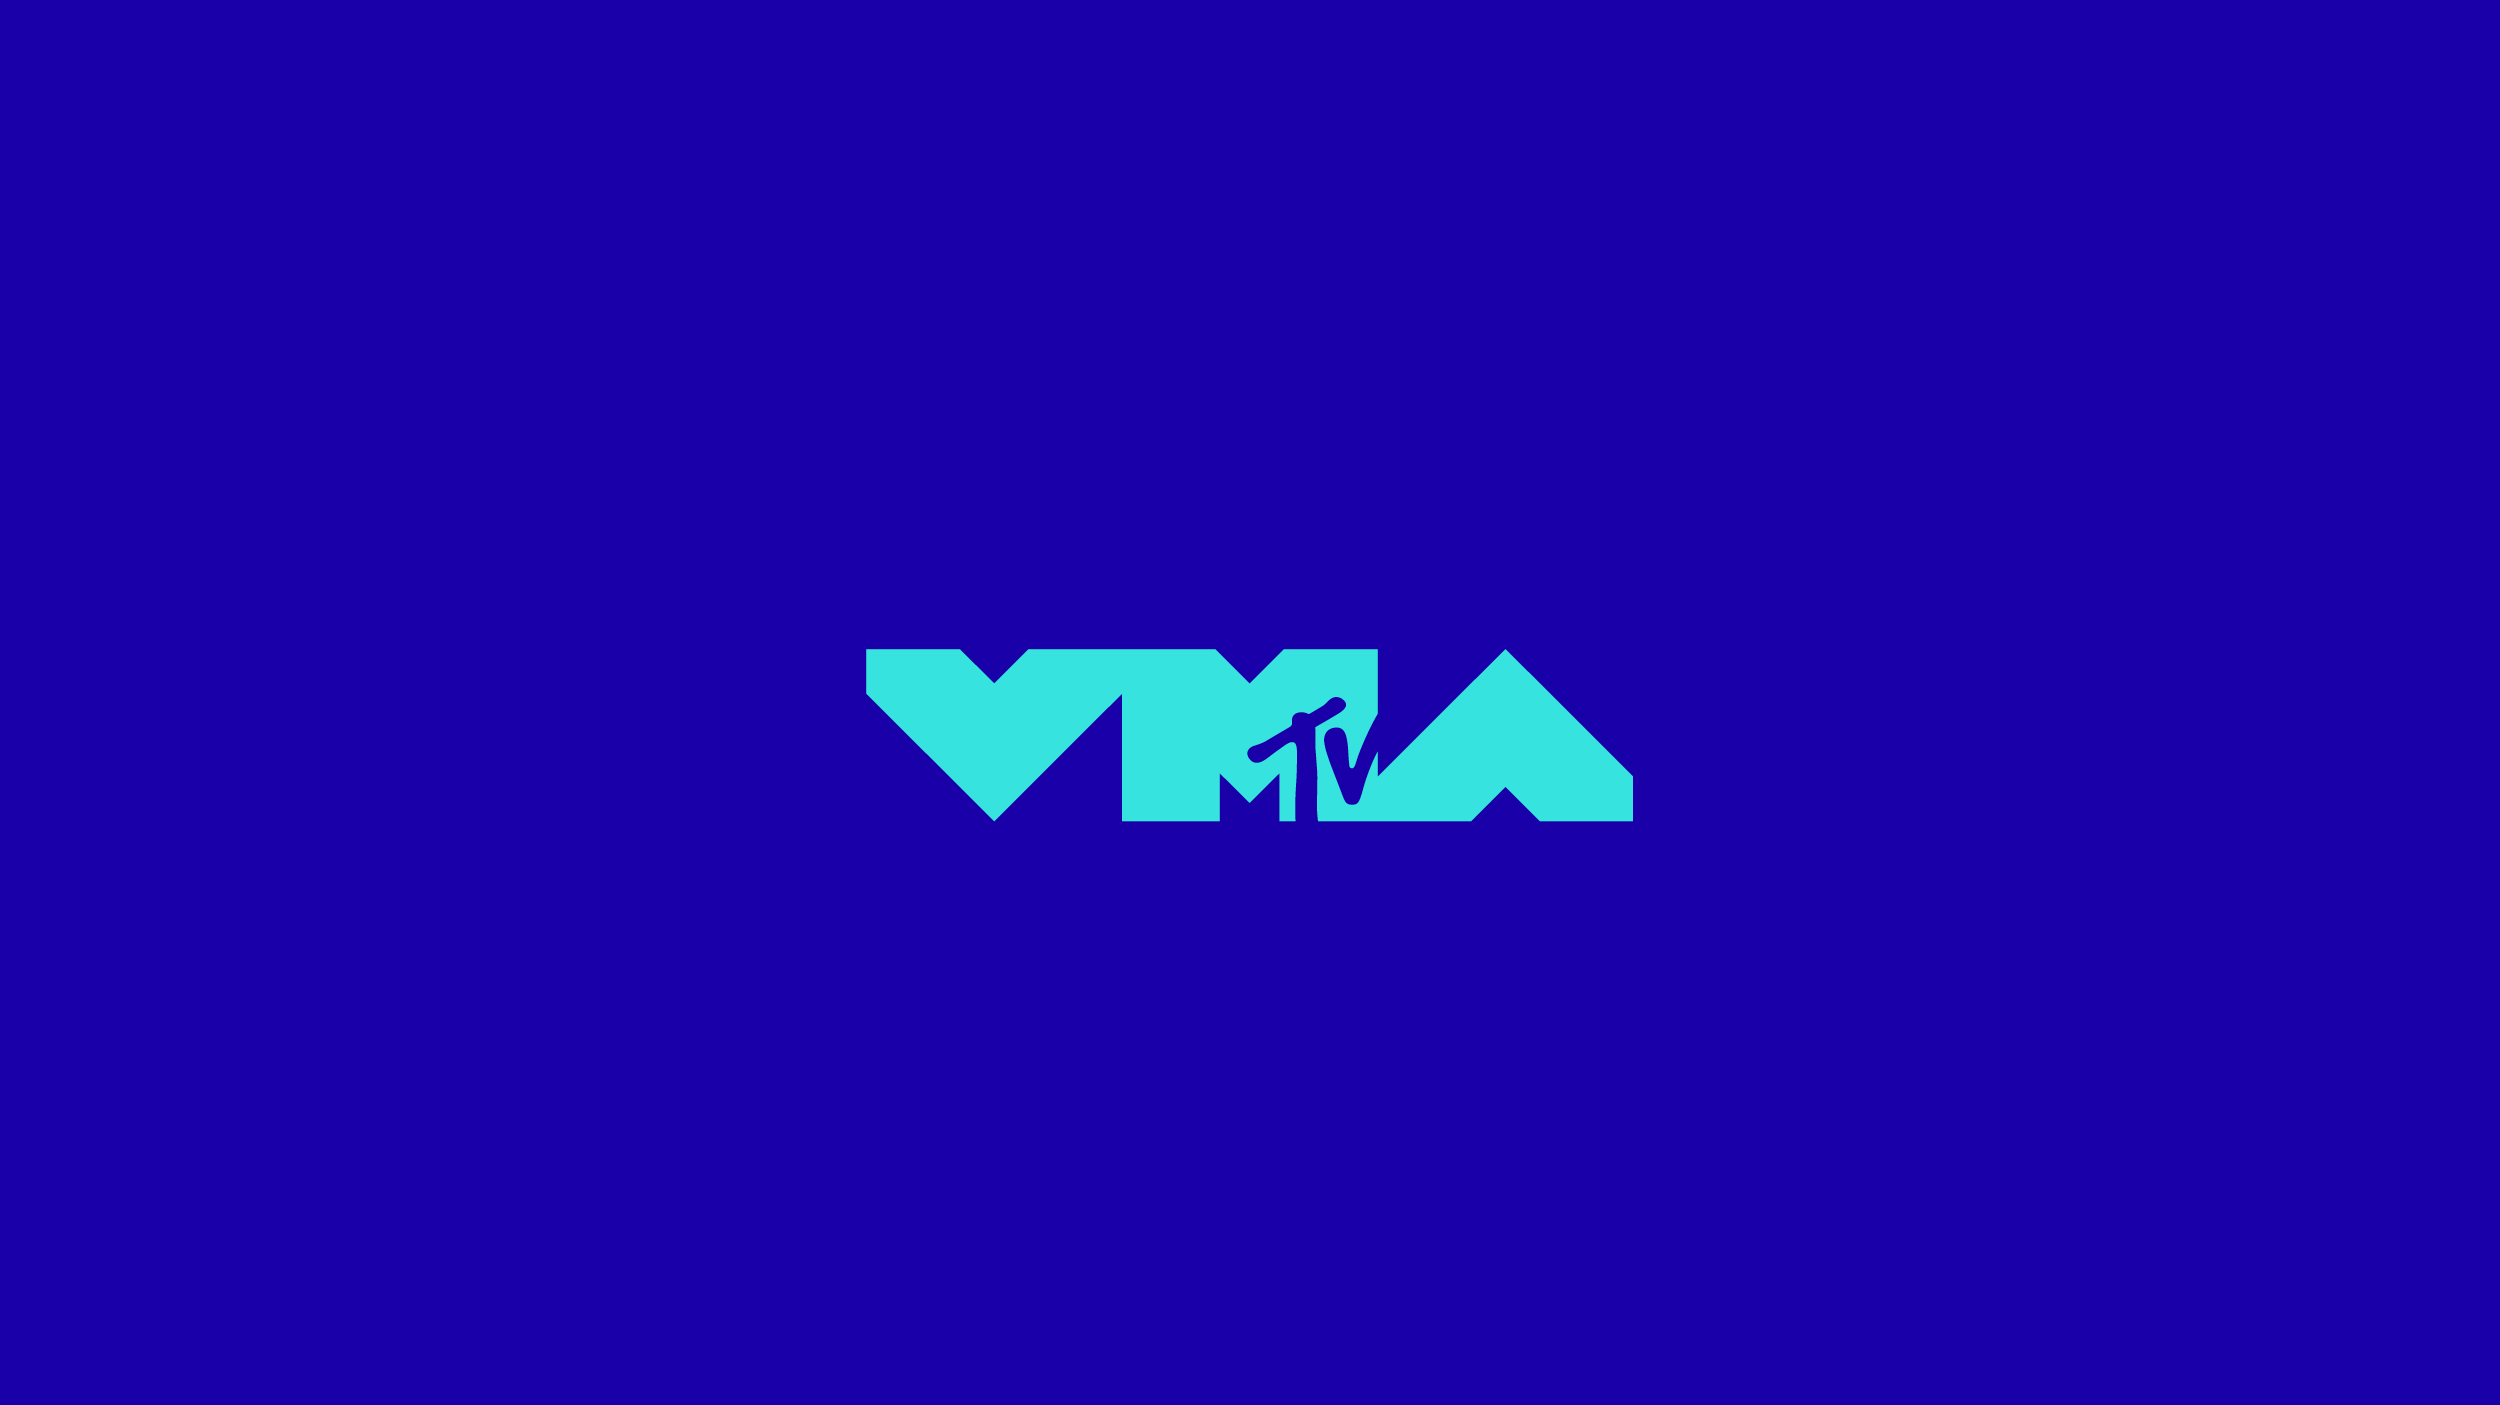 MTV 2017 Logo - New Logo and Look for 2017 MTV Video Music Awards